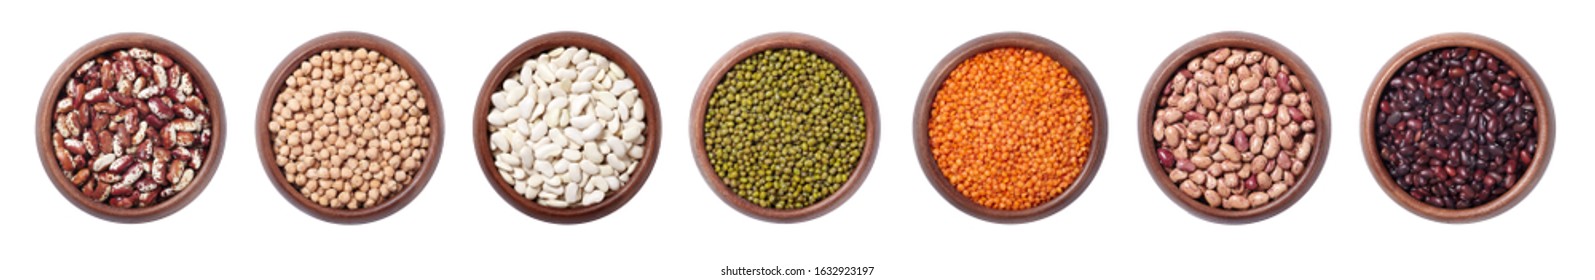 Collection of mixed beans, legumes and lentils isolated on white background. - Shutterstock ID 1632923197